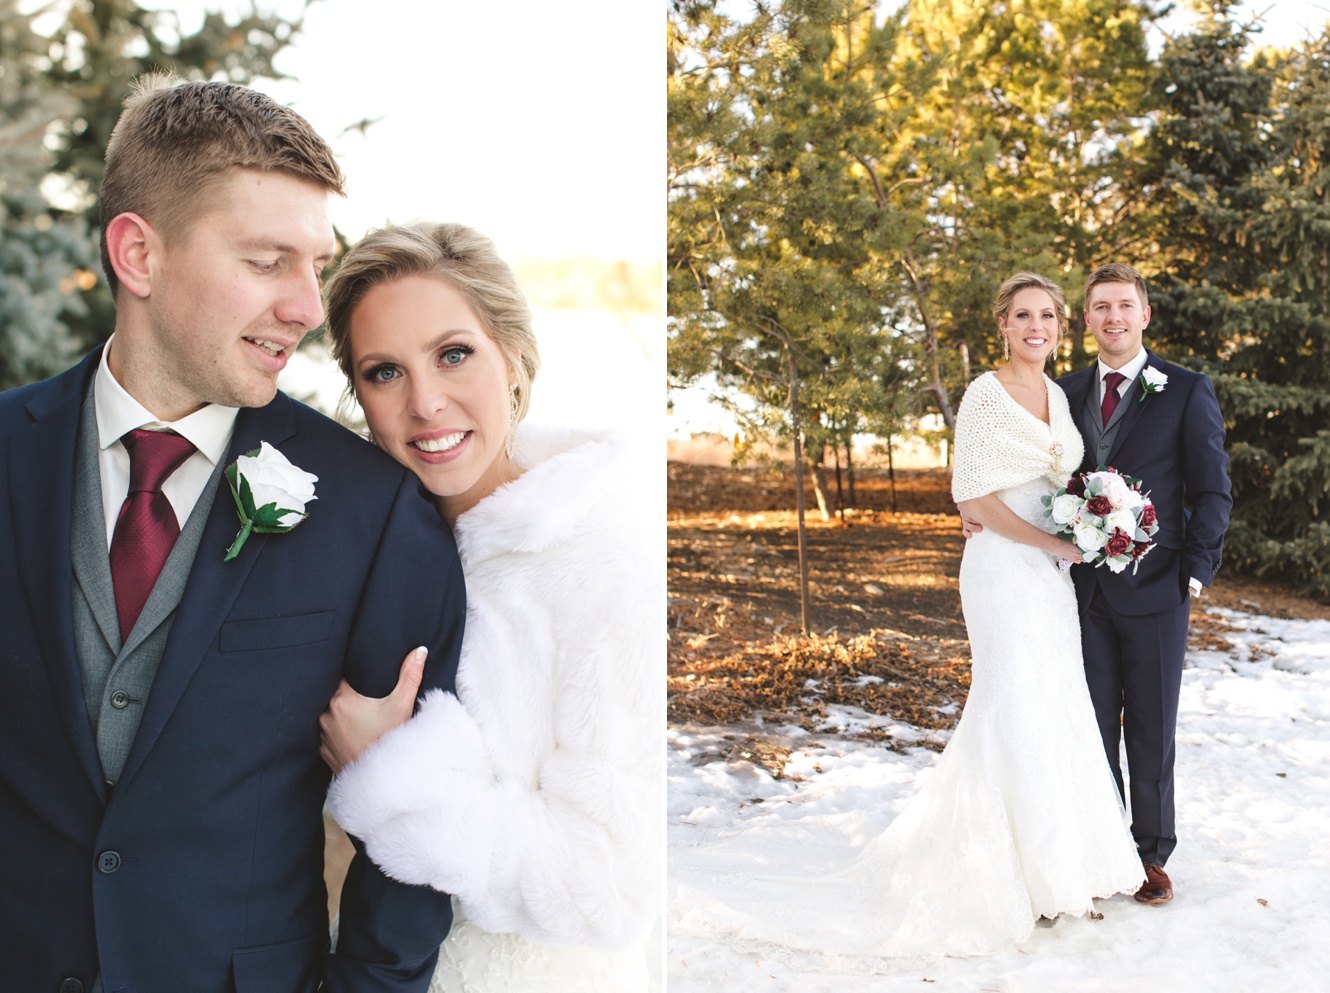 How to plan a winter wedding photo